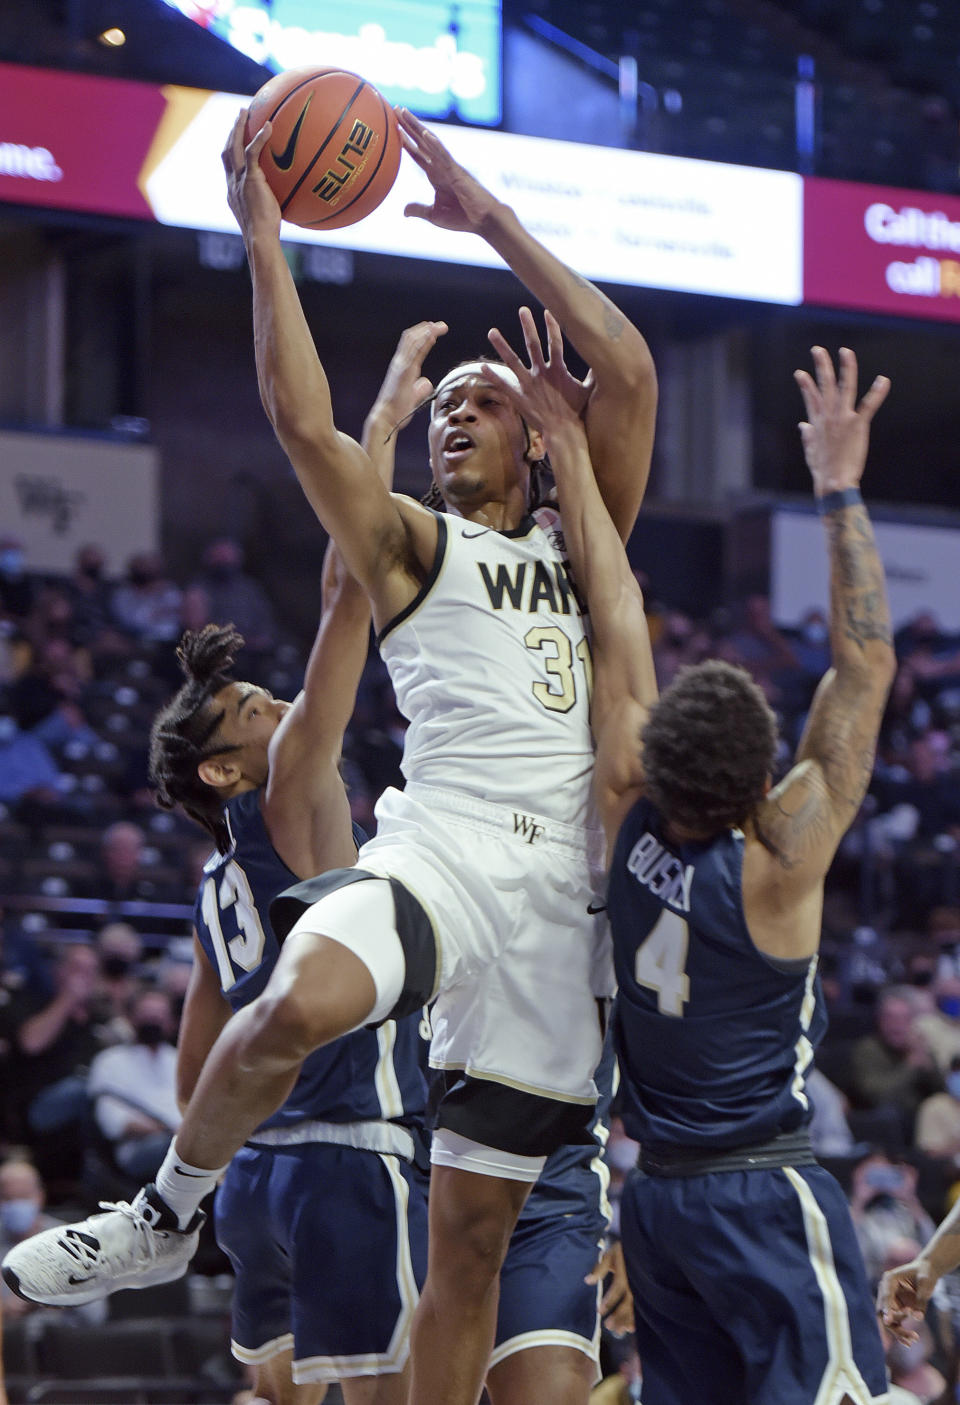 Wake Forest's Alondes Williams drives to the basket between Charleston Southern's Tahlik Chavez (13) and Deontaye Buskey during the first half of an NCAA college basketball game Wednesday, Nov. 17, 2021, in Winston-Salem, N.C. (Walt Unks/The Winston-Salem Journal via AP)